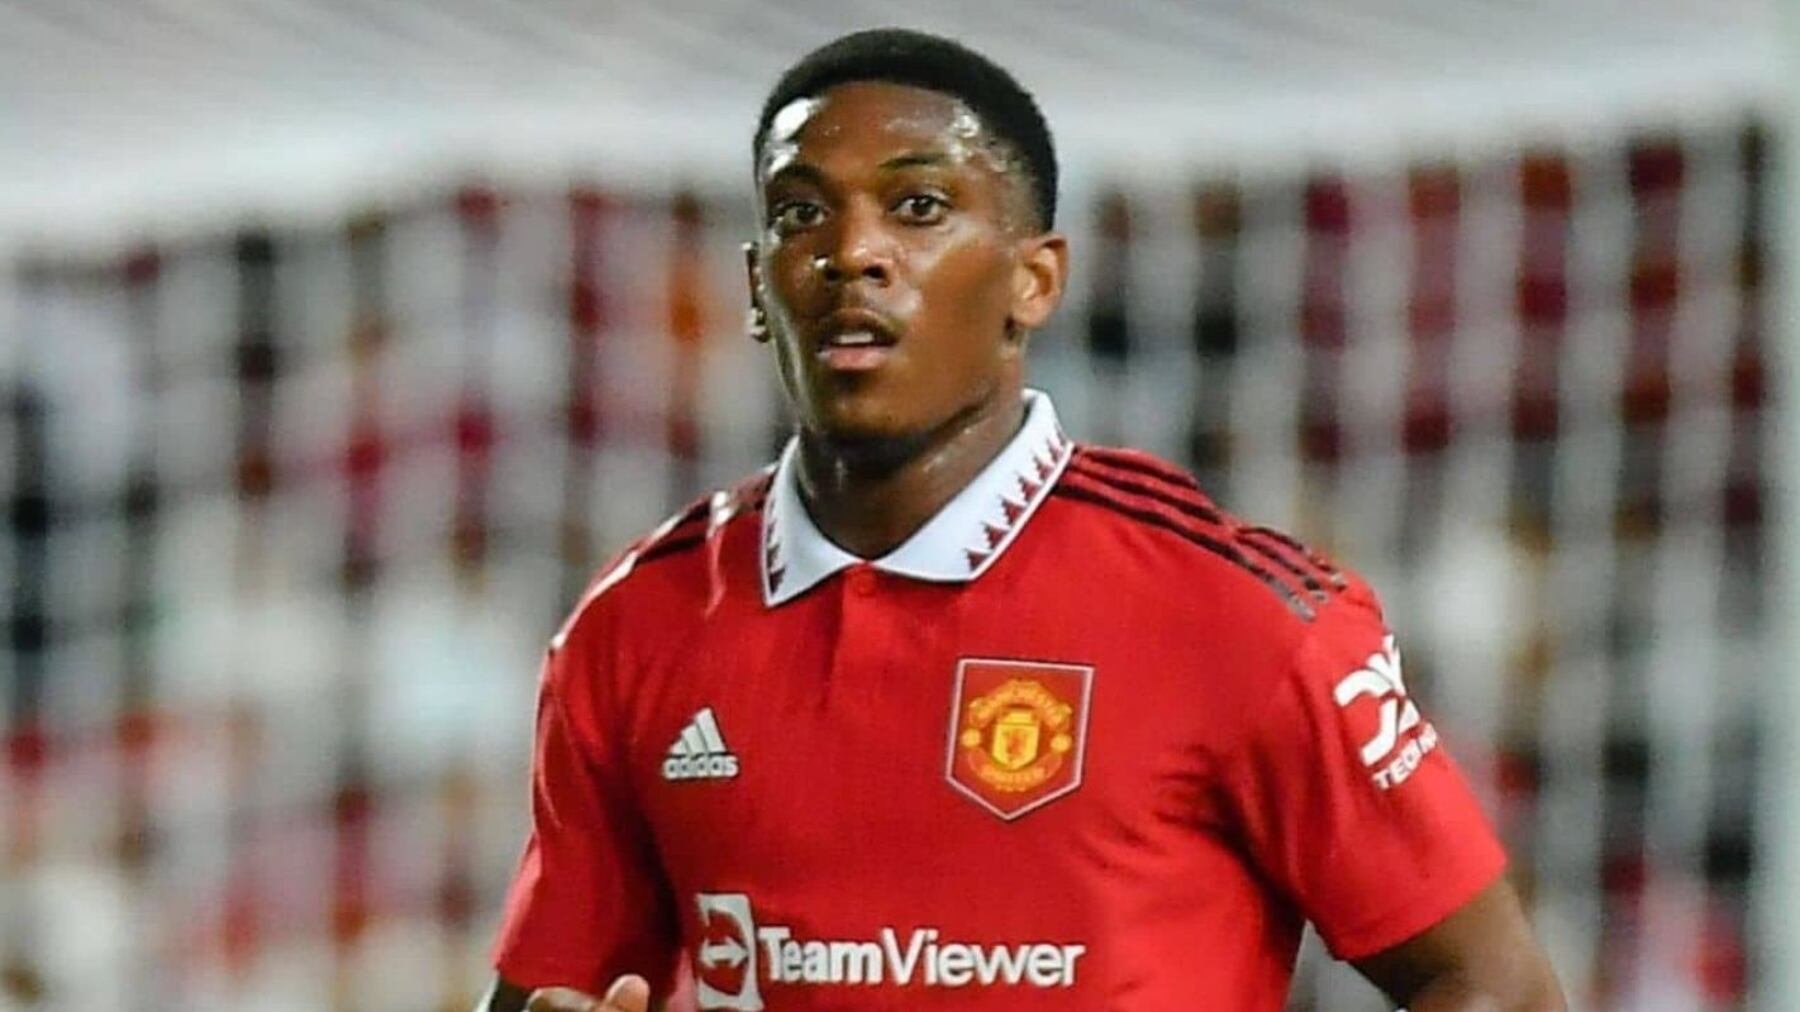 To get him out of Manchester United, Saudi Arabia's offer to Martial that shocks